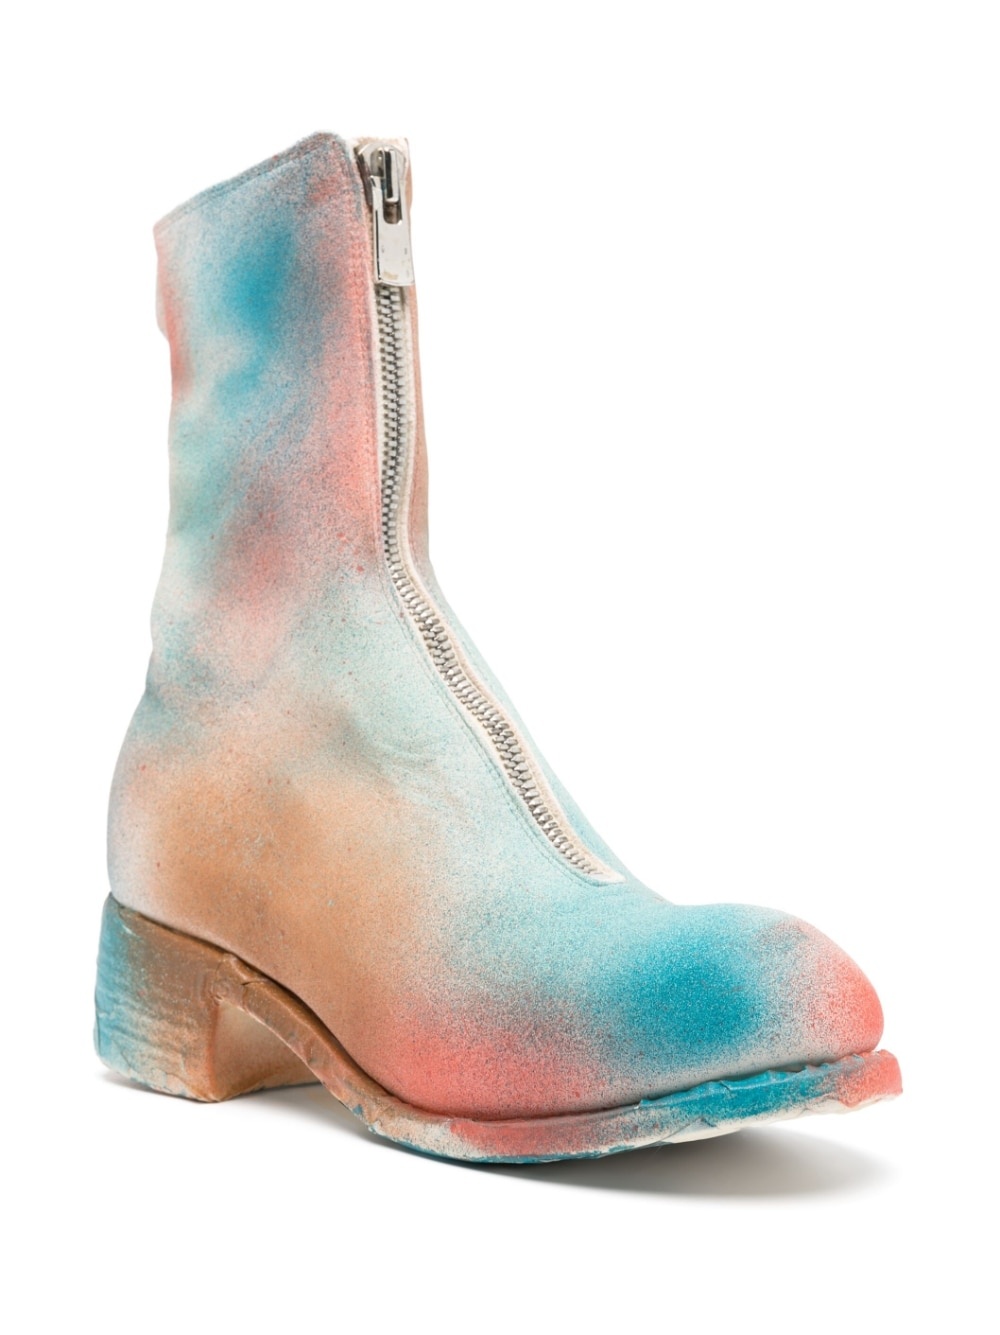 spray-paint effect boots - 2